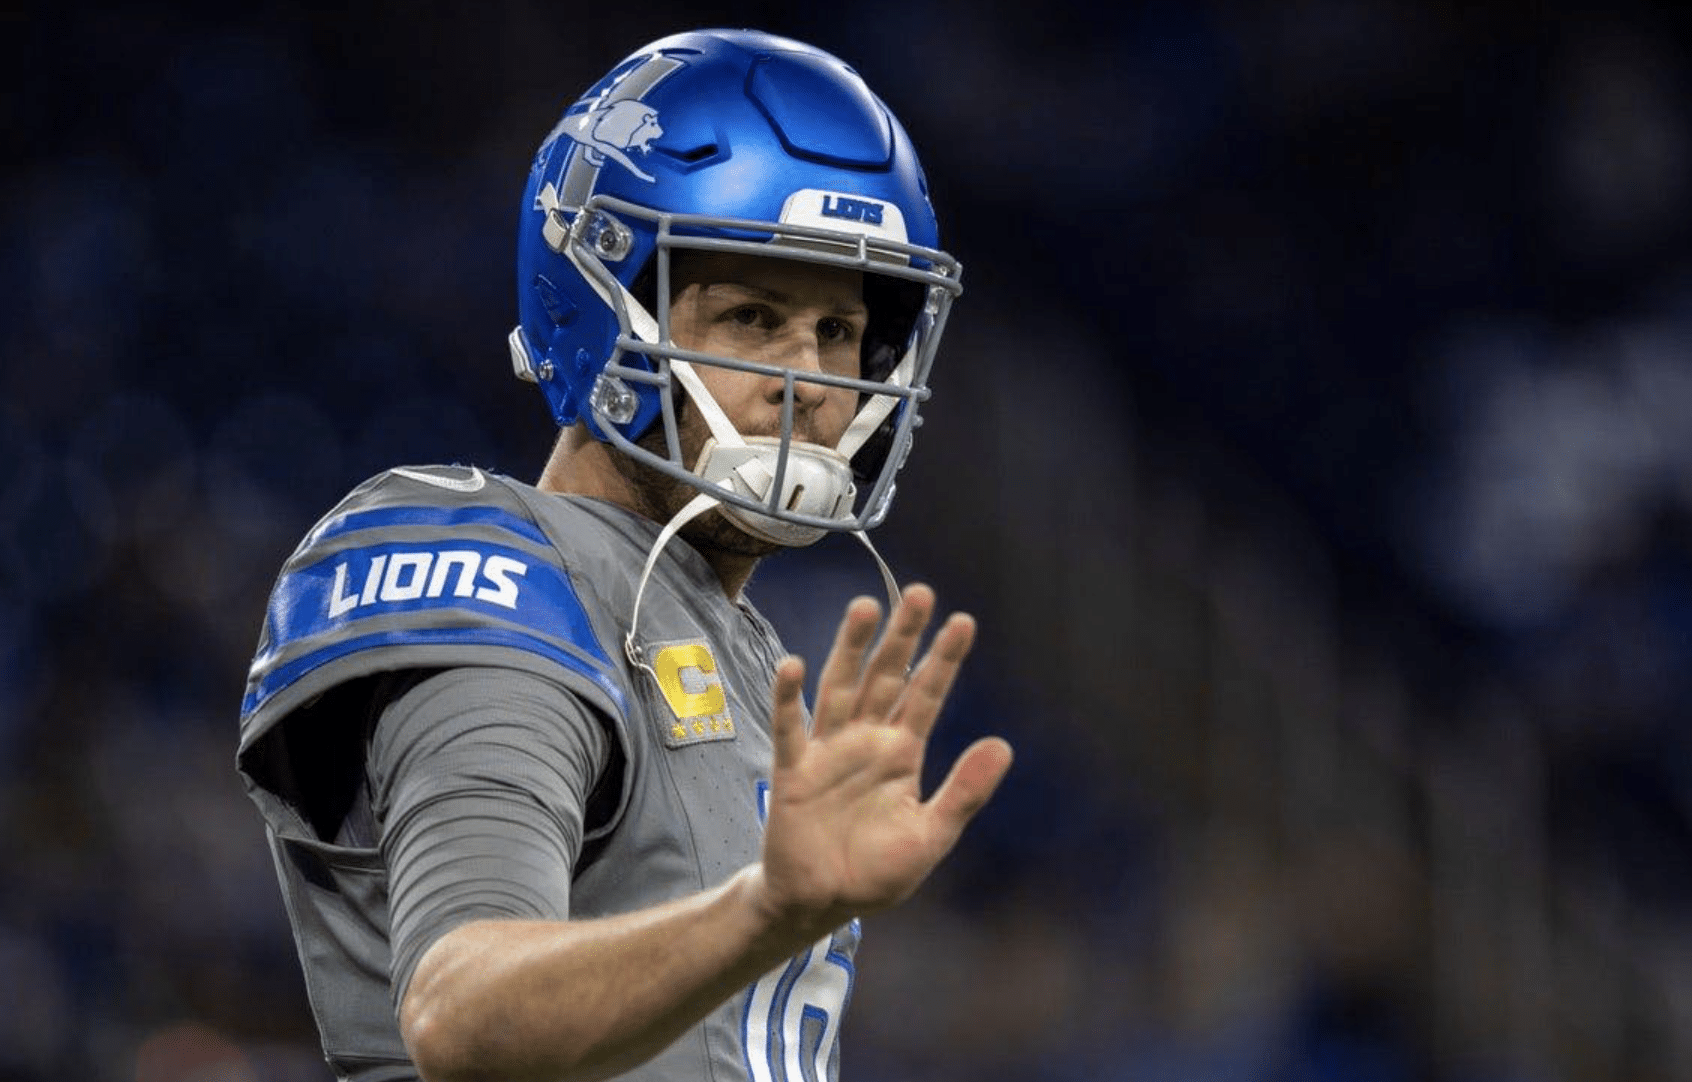 Jared Goff says thanks Detroit Lions to negotiate mega-contract with Jared Goff Detroit Lions QB Jared Goff Detroit Lions starting offense Jared Goff upsets SOME Detroit Lions fans Jared Goff 'badly wants' Agent of Jared Goff Photo Credit: David Rodriguez Munoz, USA Today Sports